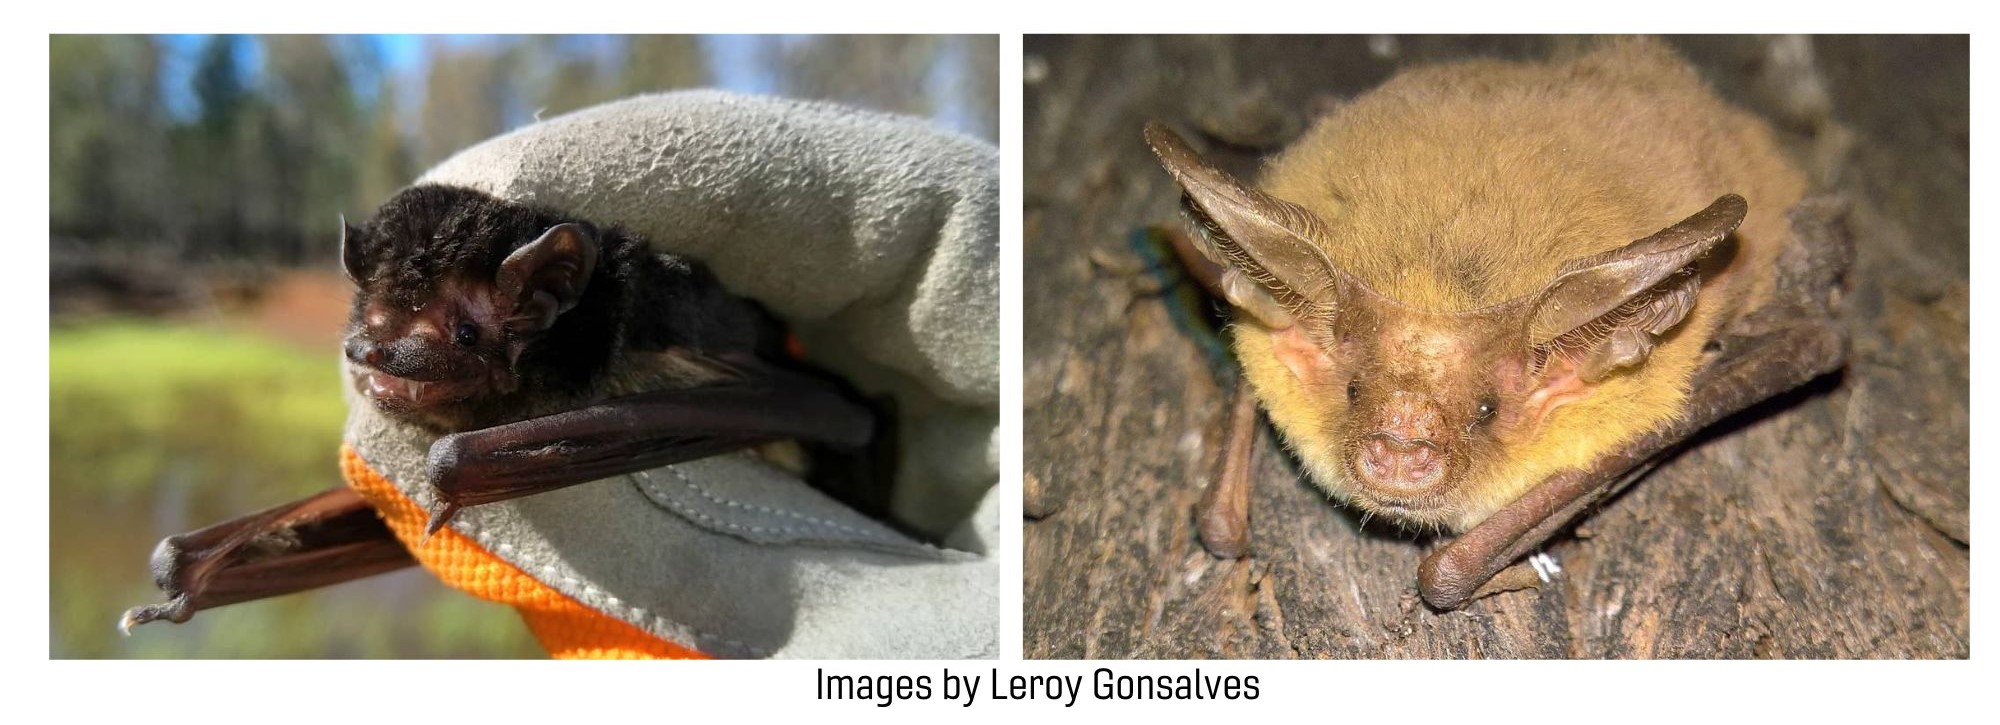 one image of a gloved hand holding a small bat for scientific surveying. One image of another microbat.